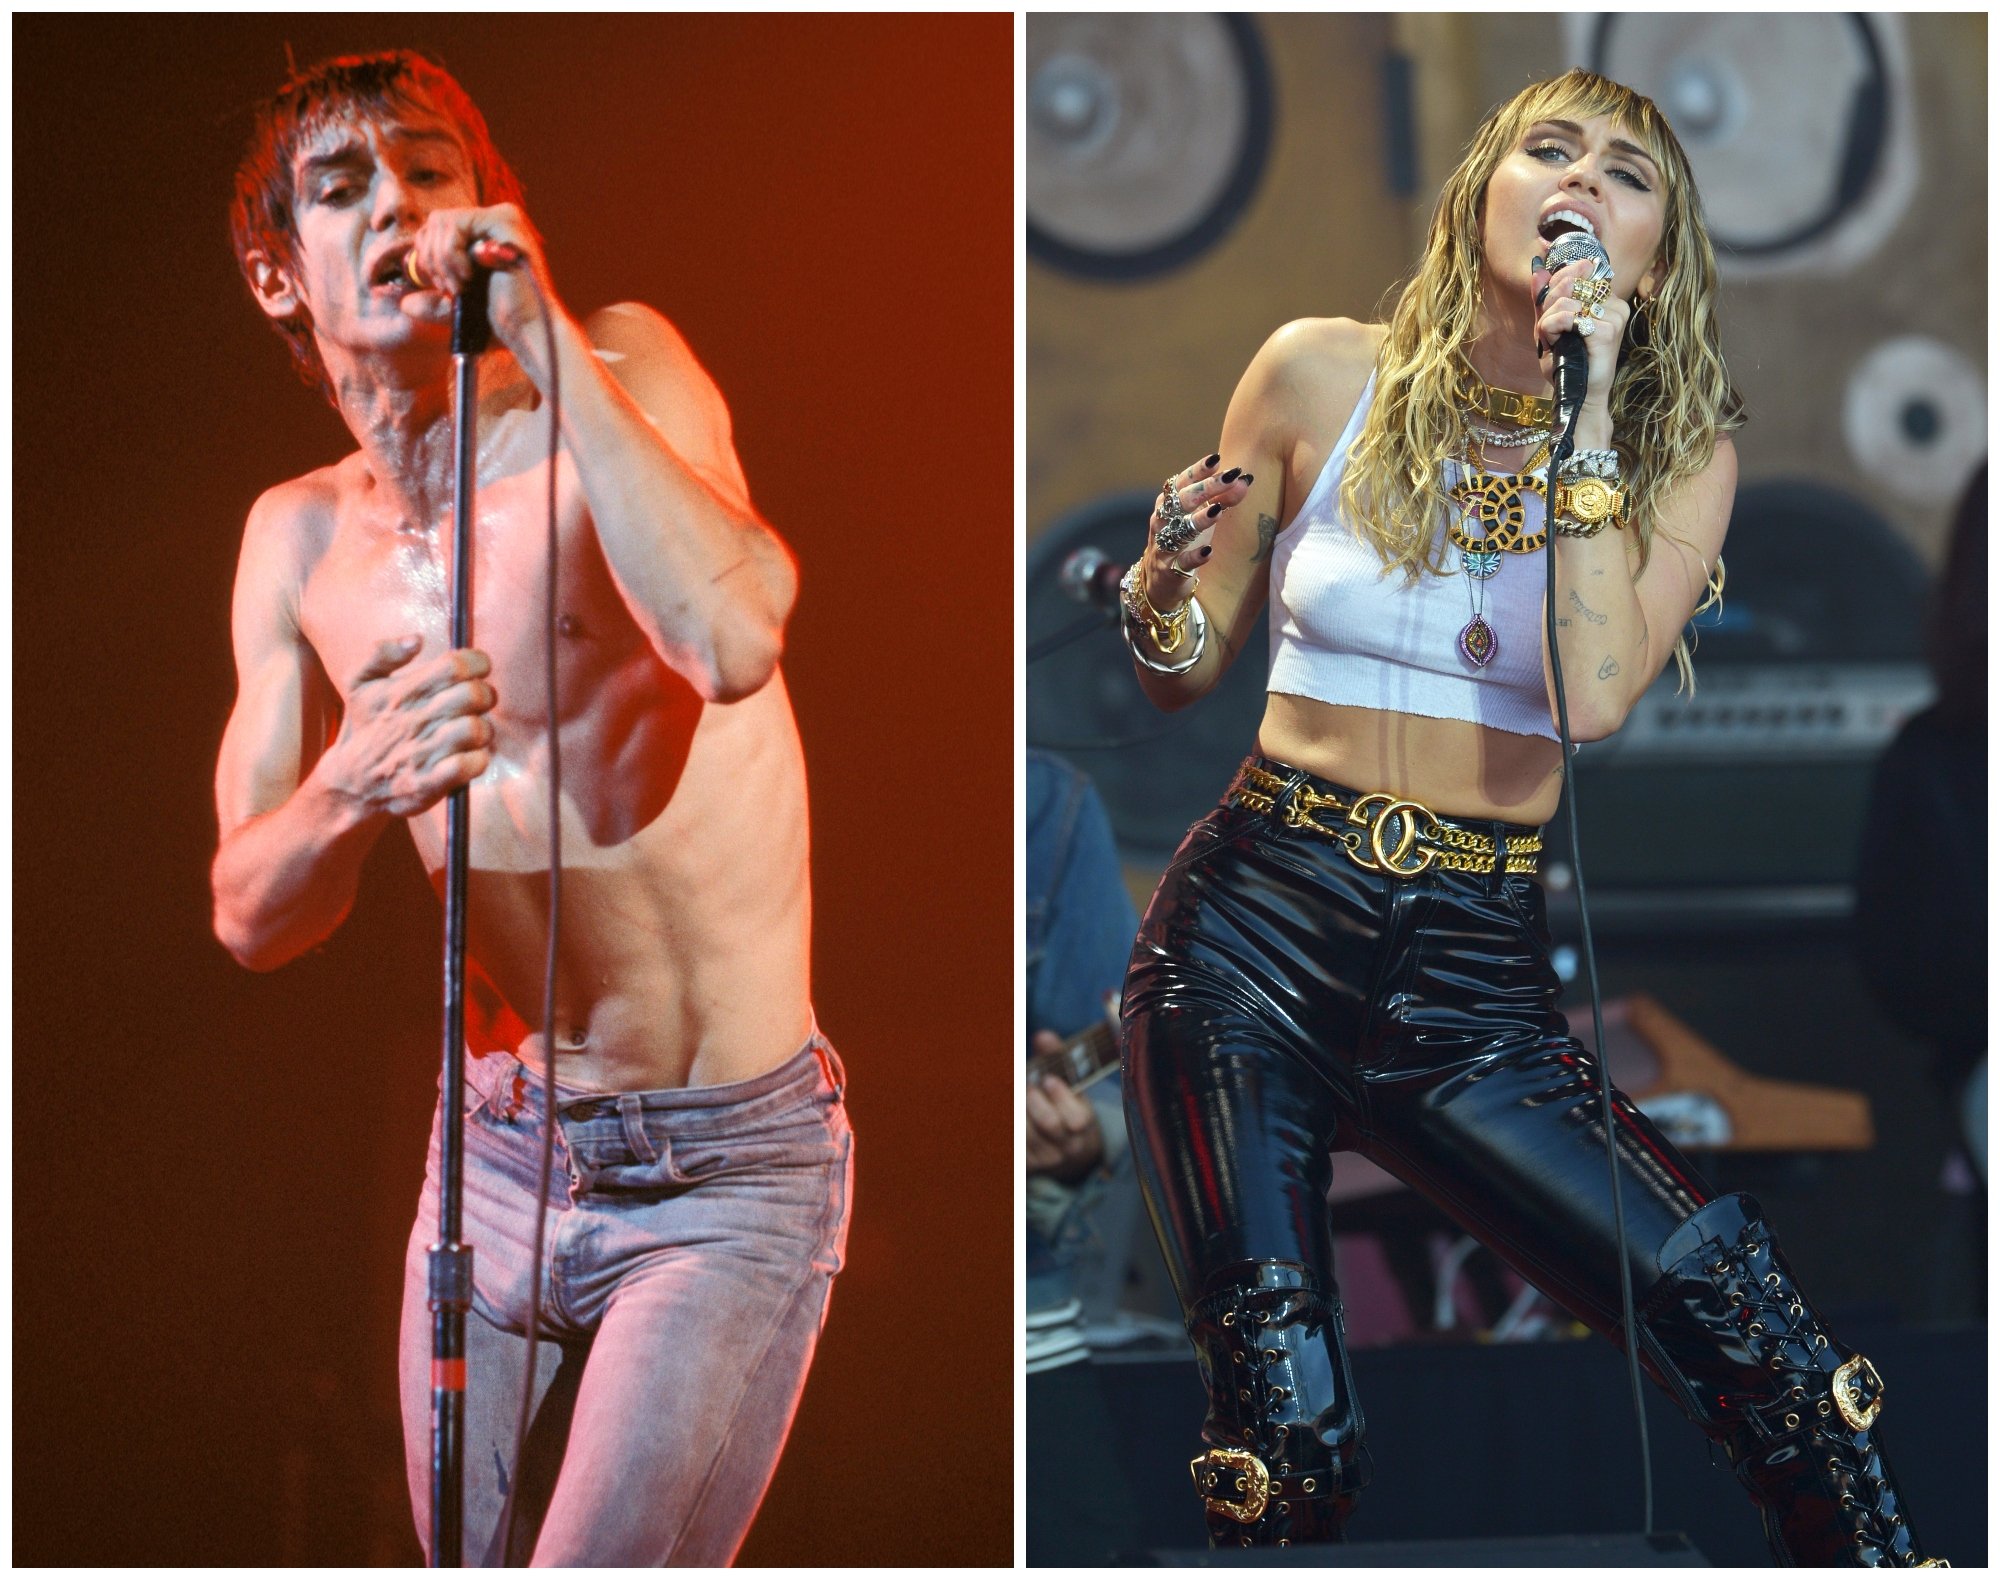 composite image of Iggy Pop and Miley Cyrus